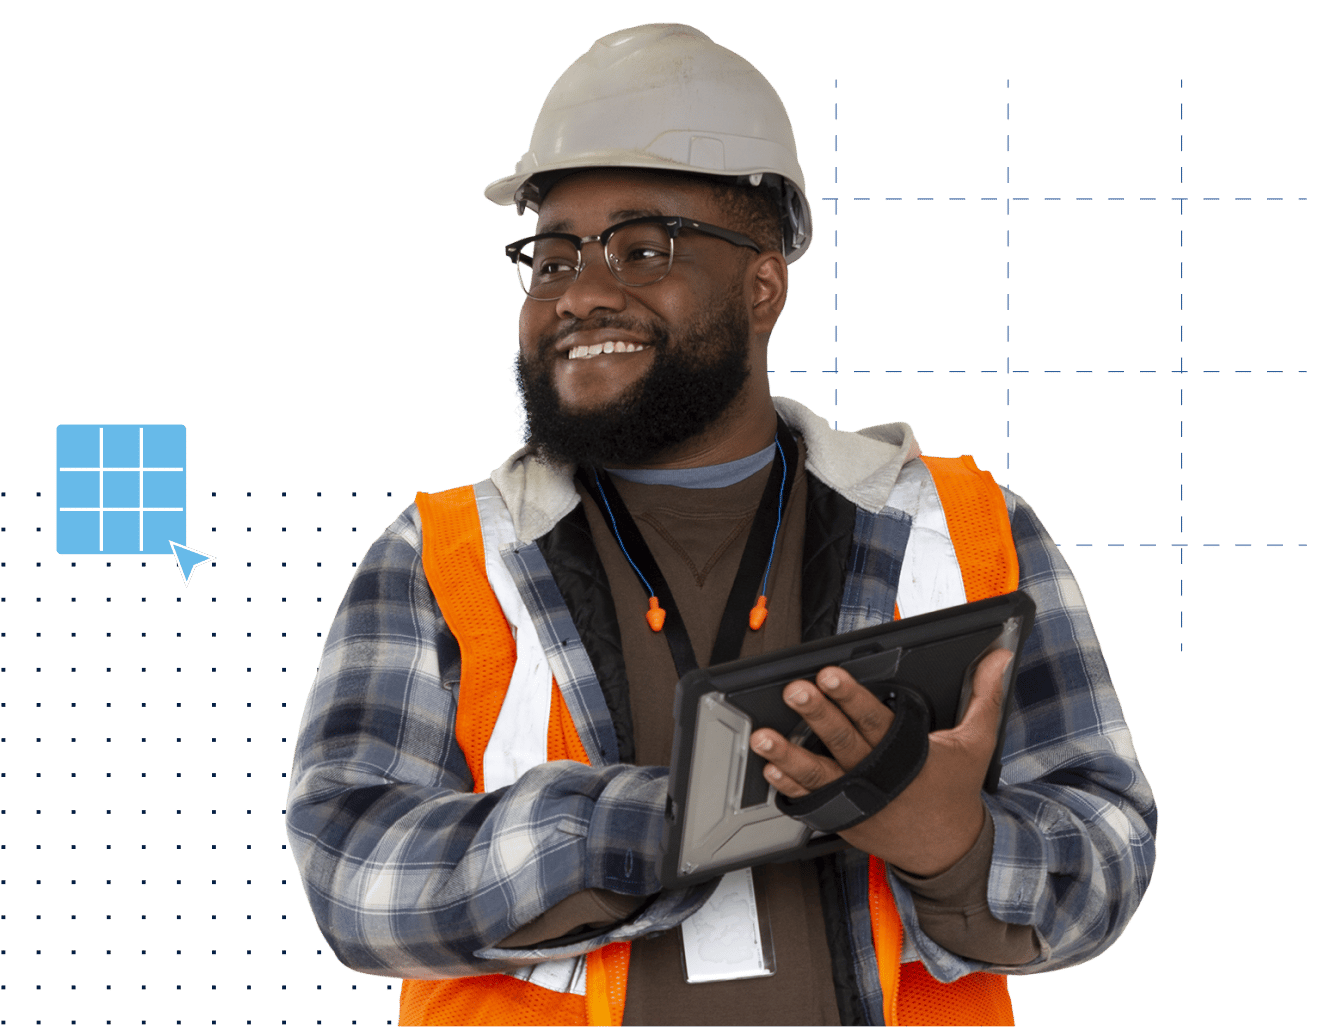 smiling male general contractor wearing a hardhat and vest using a tablet